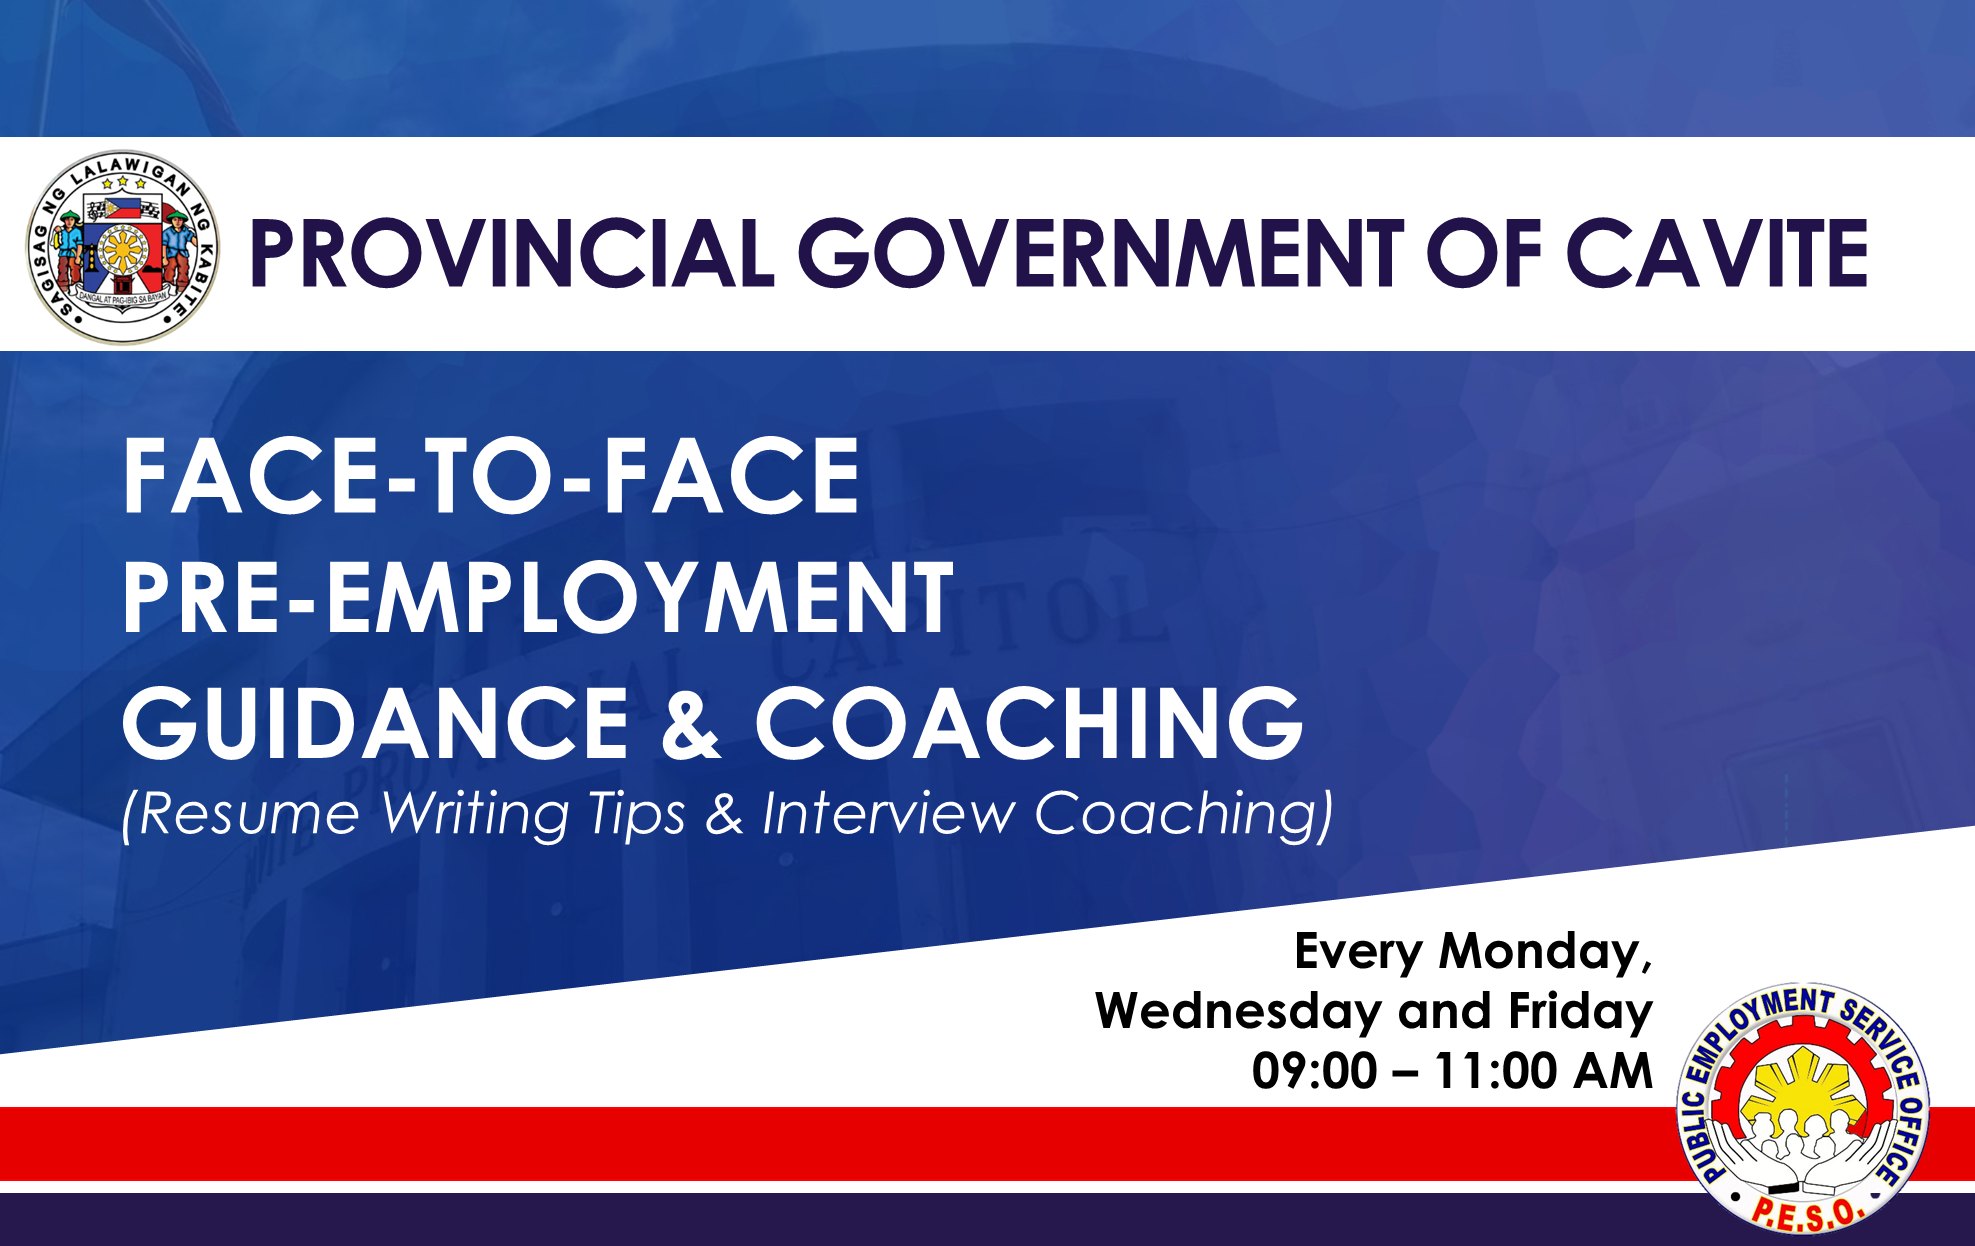 Face to face Pre-employment Guidance and Coaching